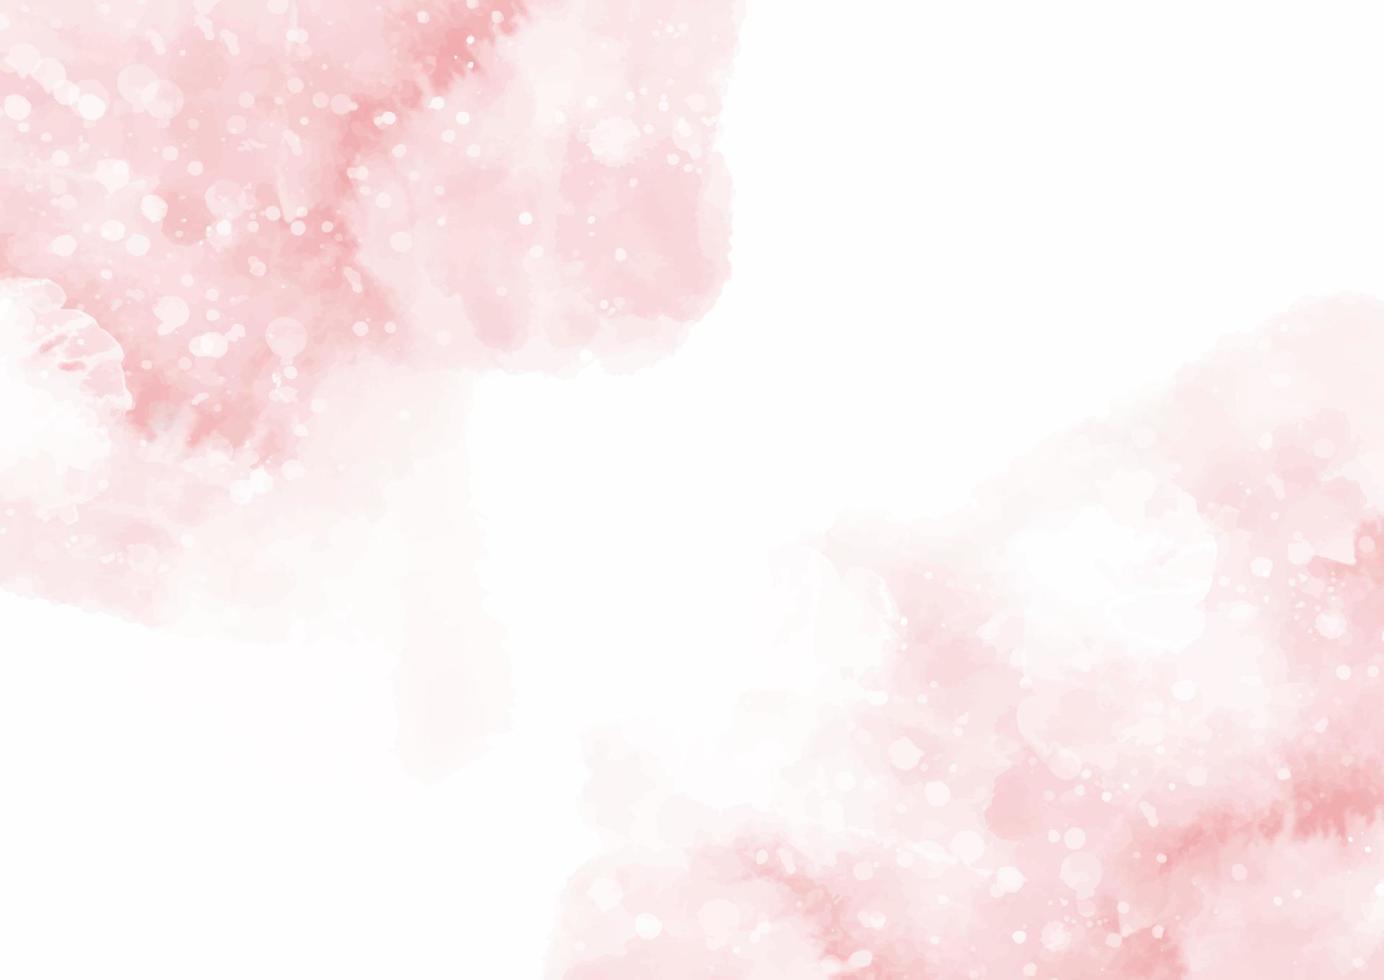 Hand painted delicate pink watercolour background vector